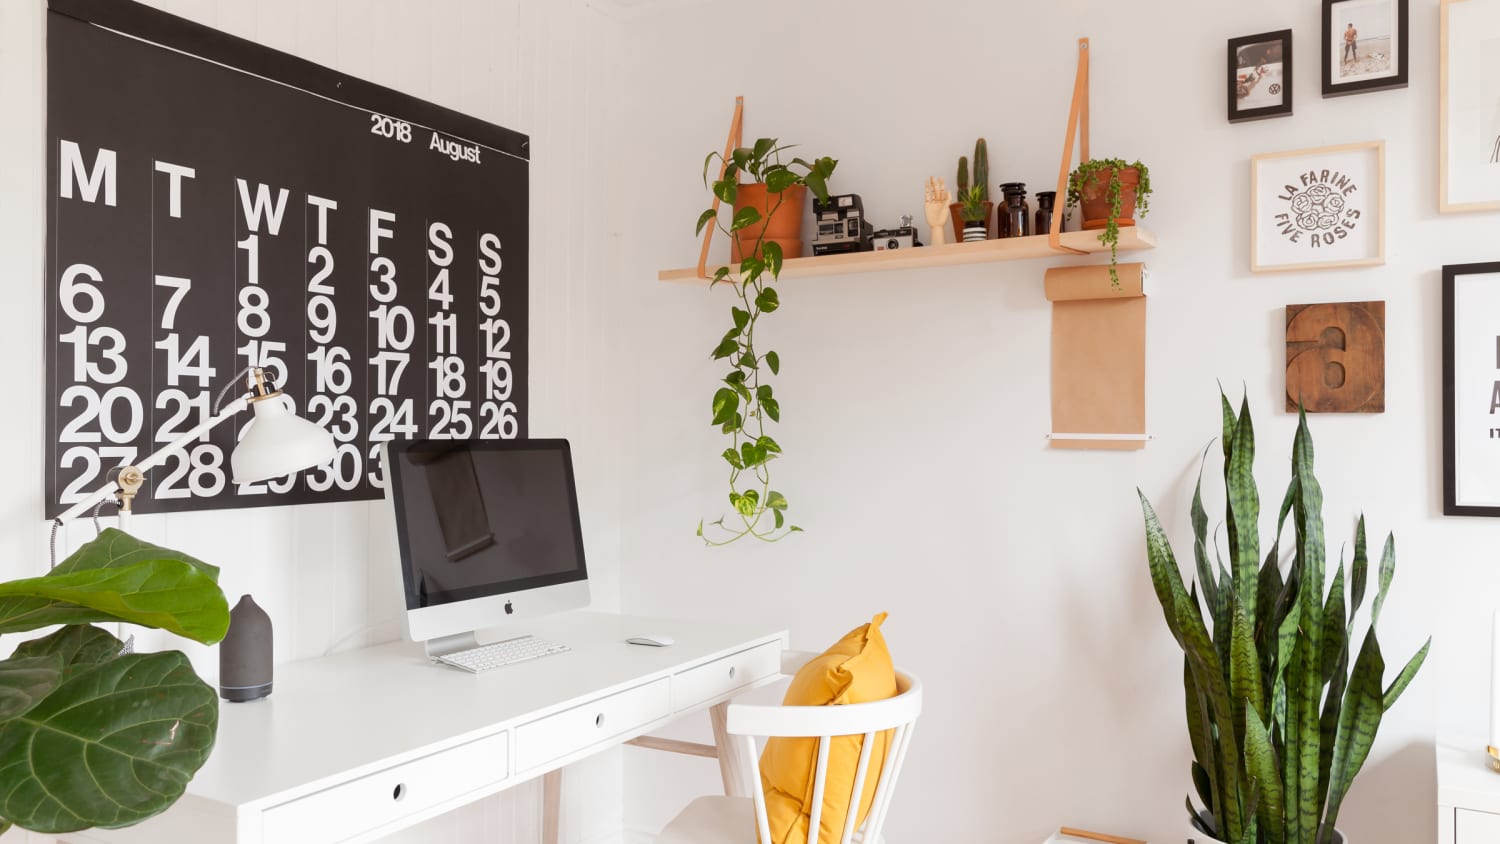 5 Easy Ways to Tidy Your Office Desk That Marie Kondo Would Approve Of |  Apartment Therapy